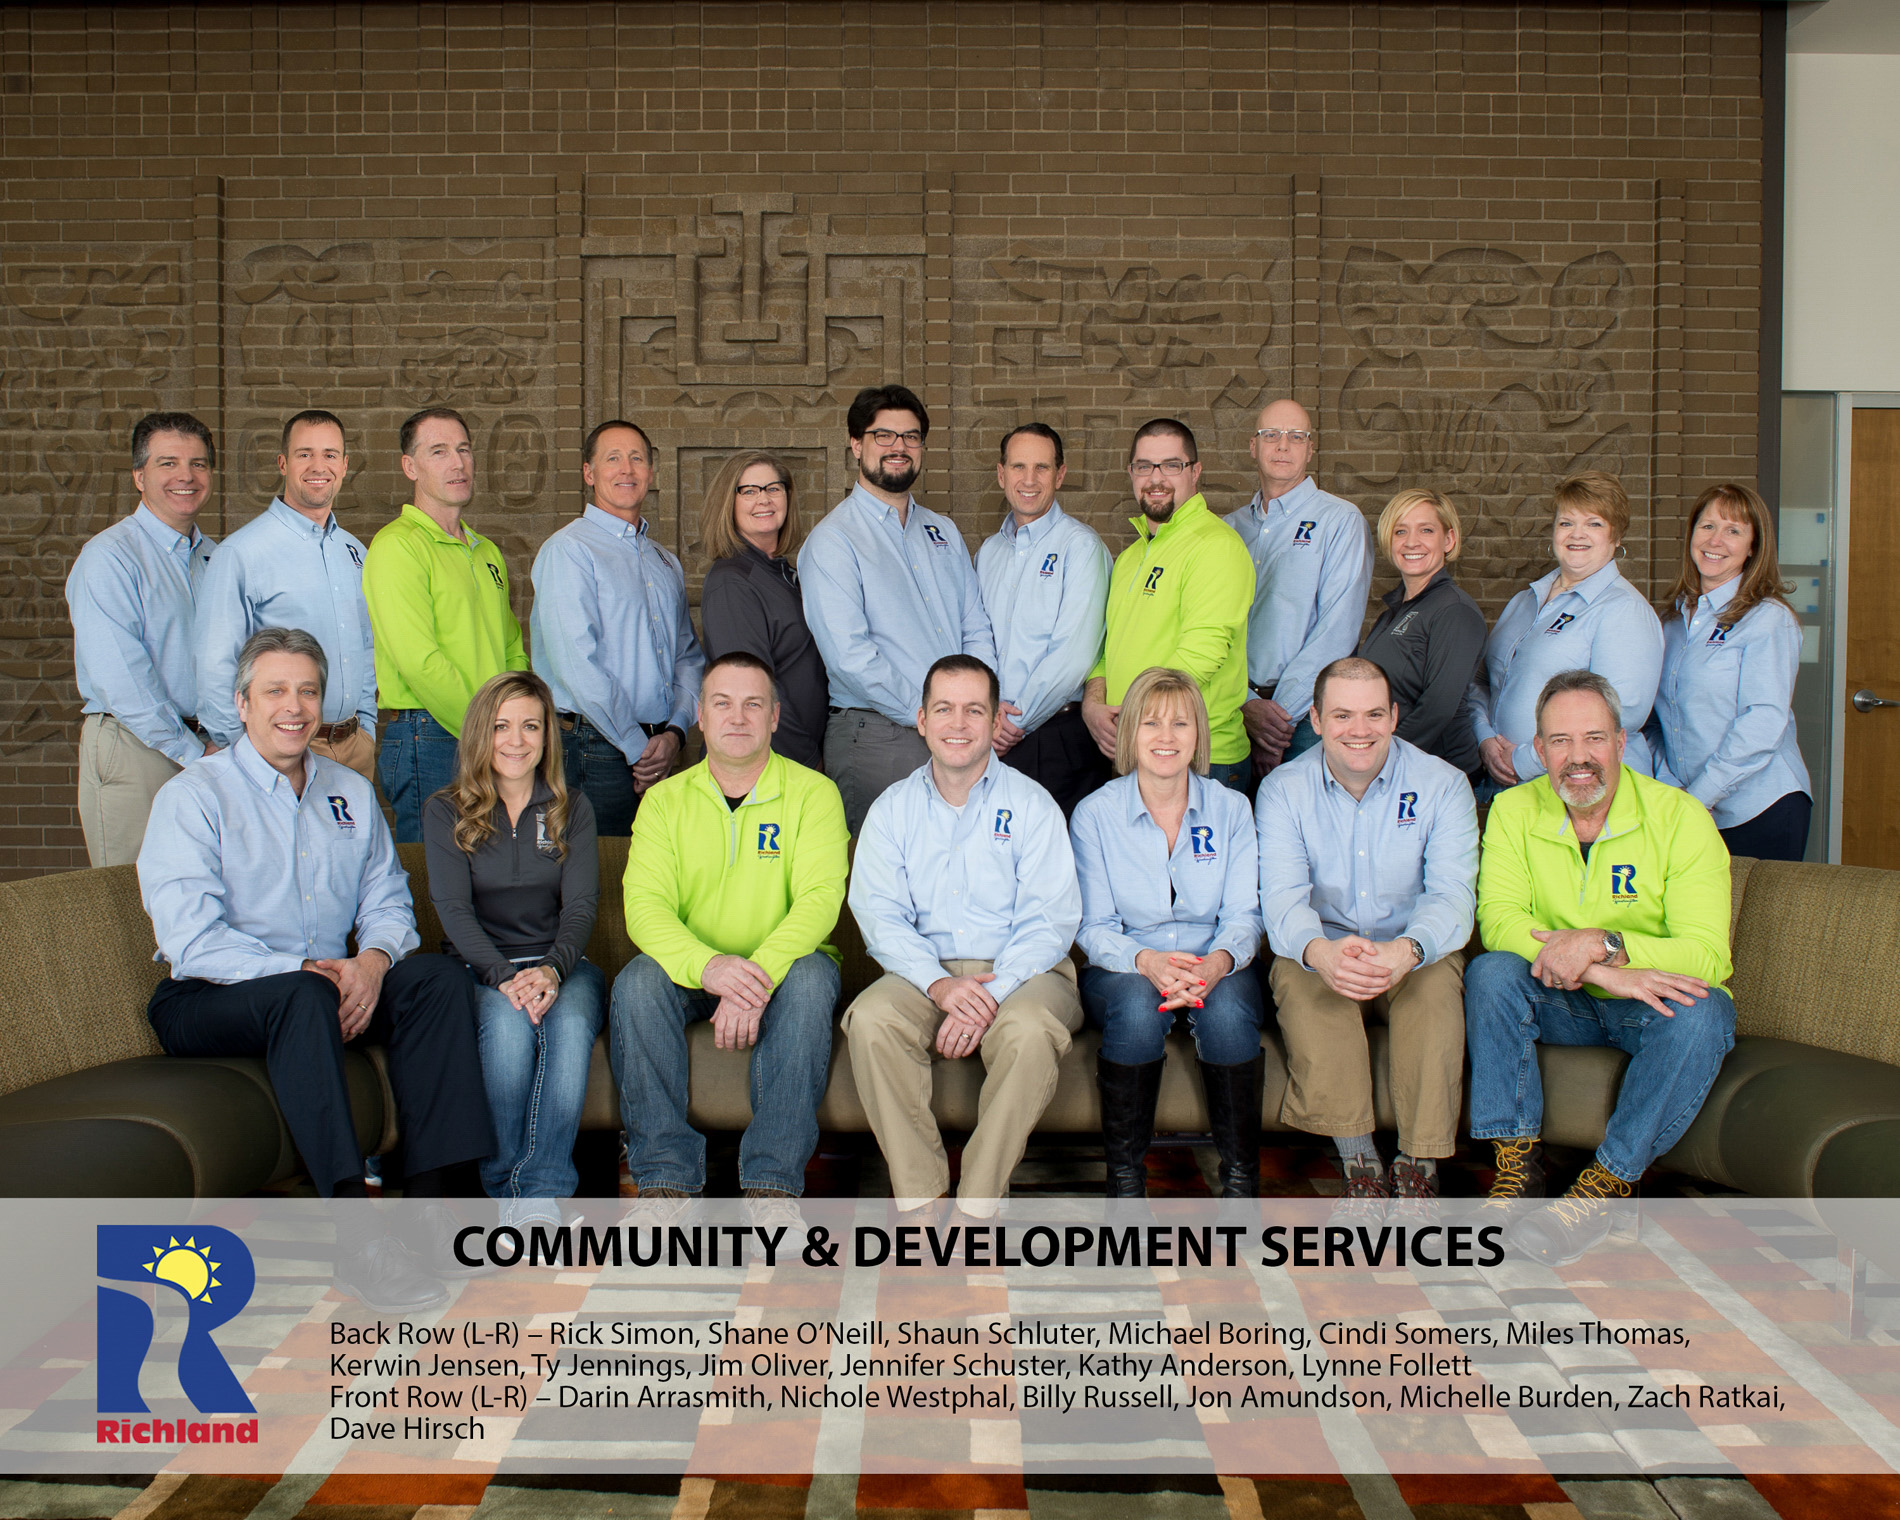 Staff Portrait for the City of Richland